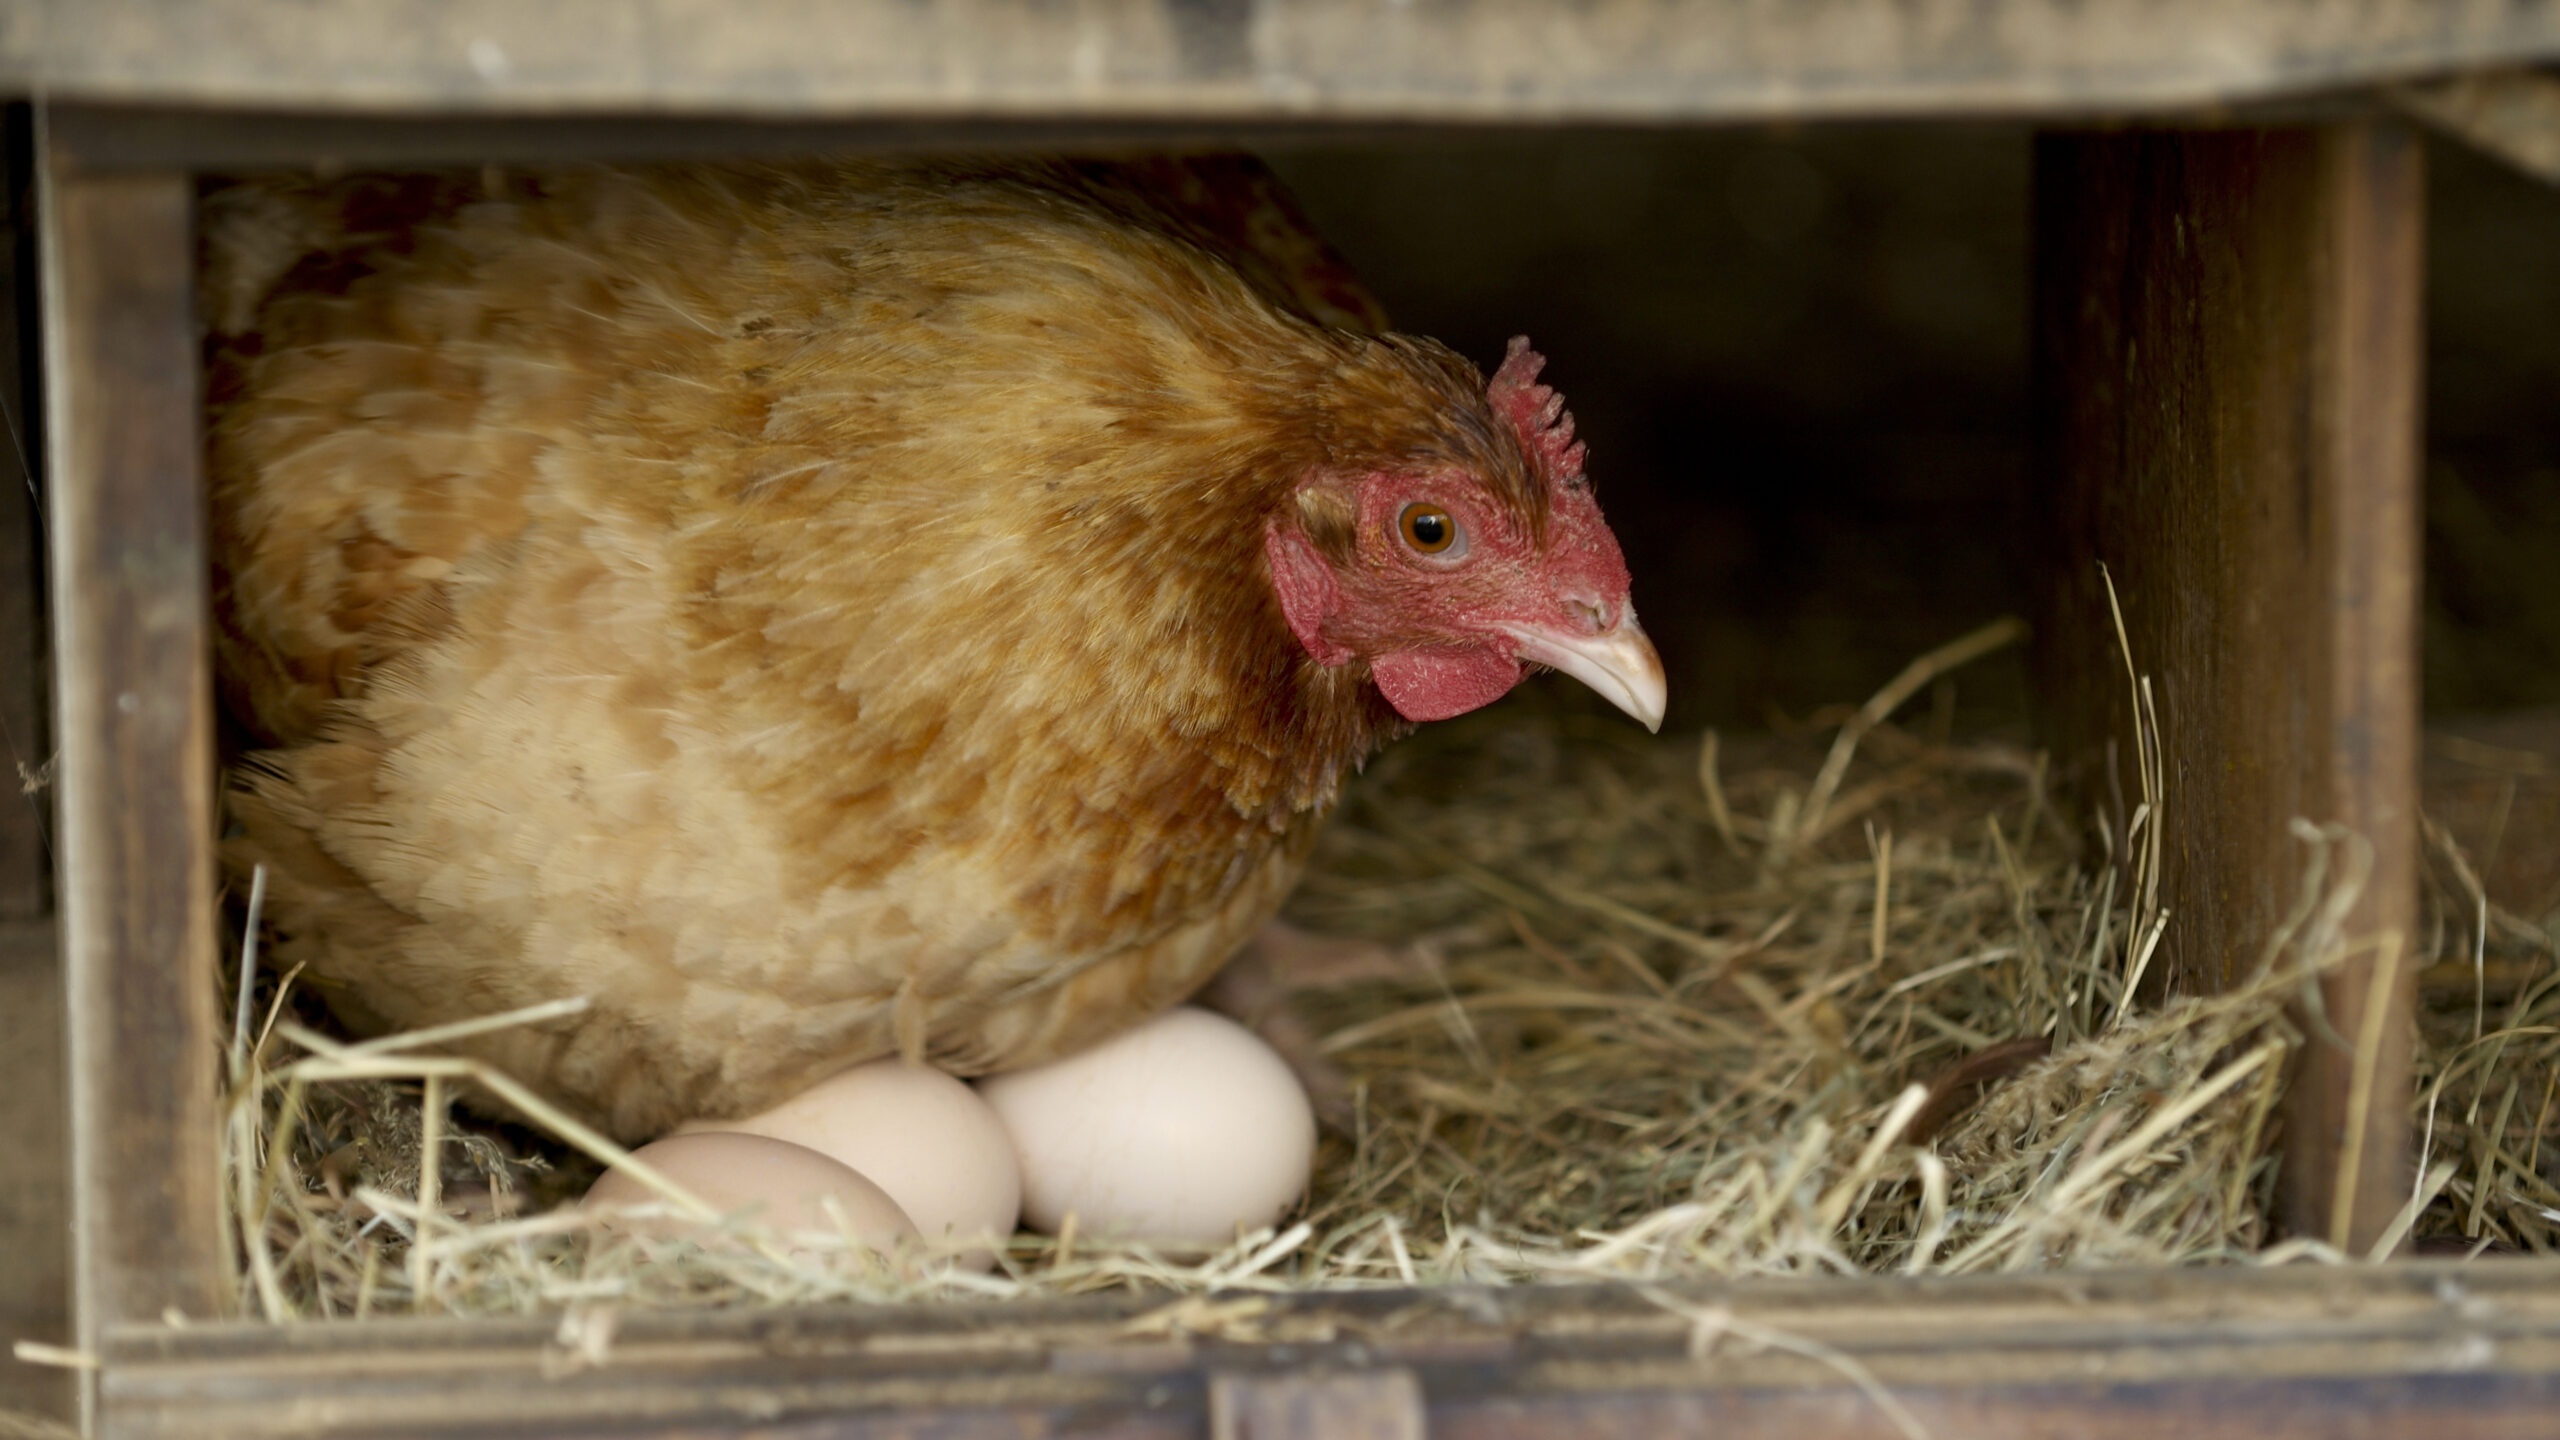 A chicken laying eggs in a box, surrounded by light